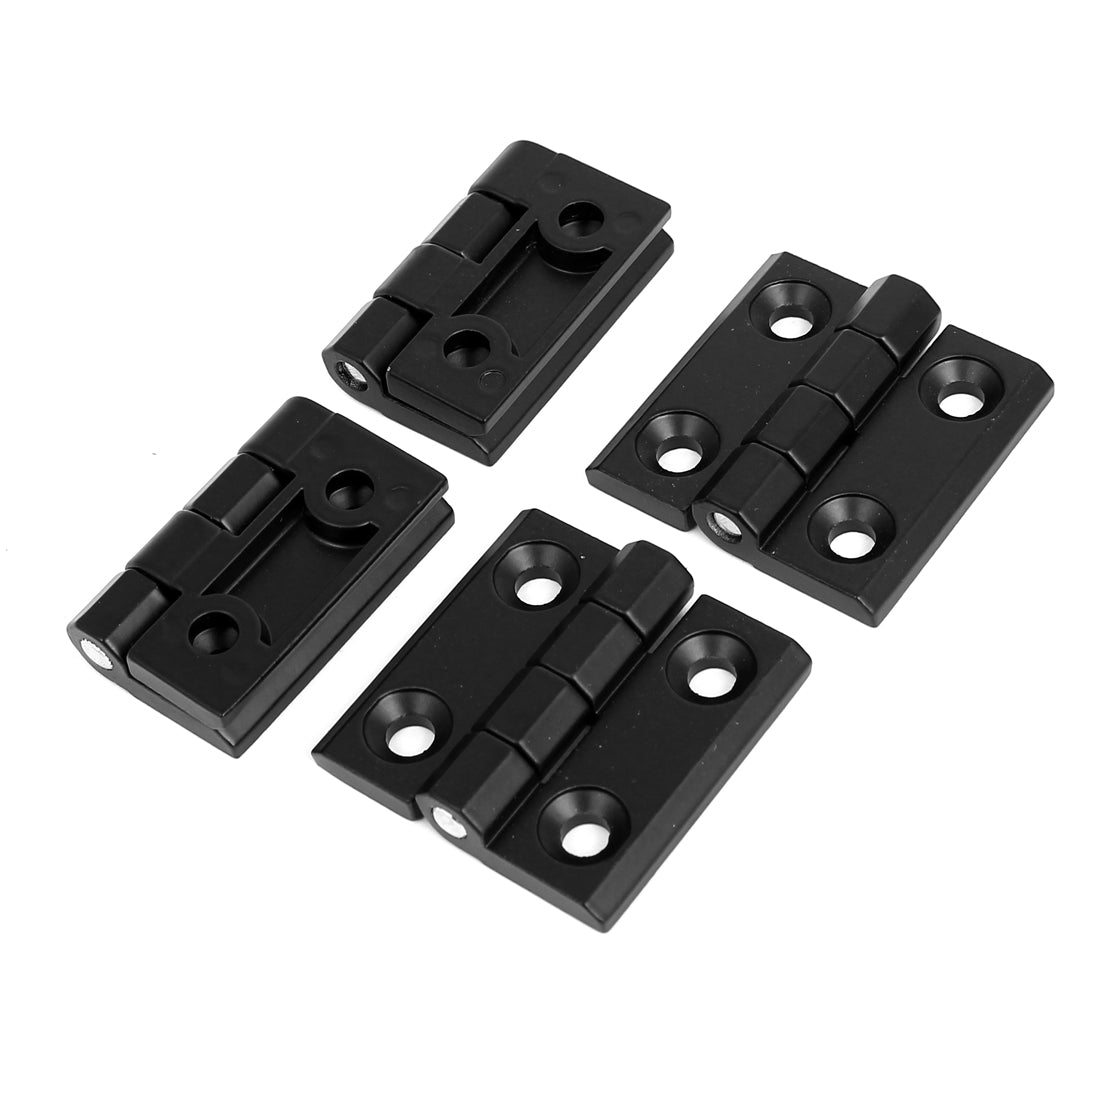 uxcell Uxcell 50mmx50mm 270 Degree Rotatable Cabinet Cupboard Closet Door Hinge 4pcs